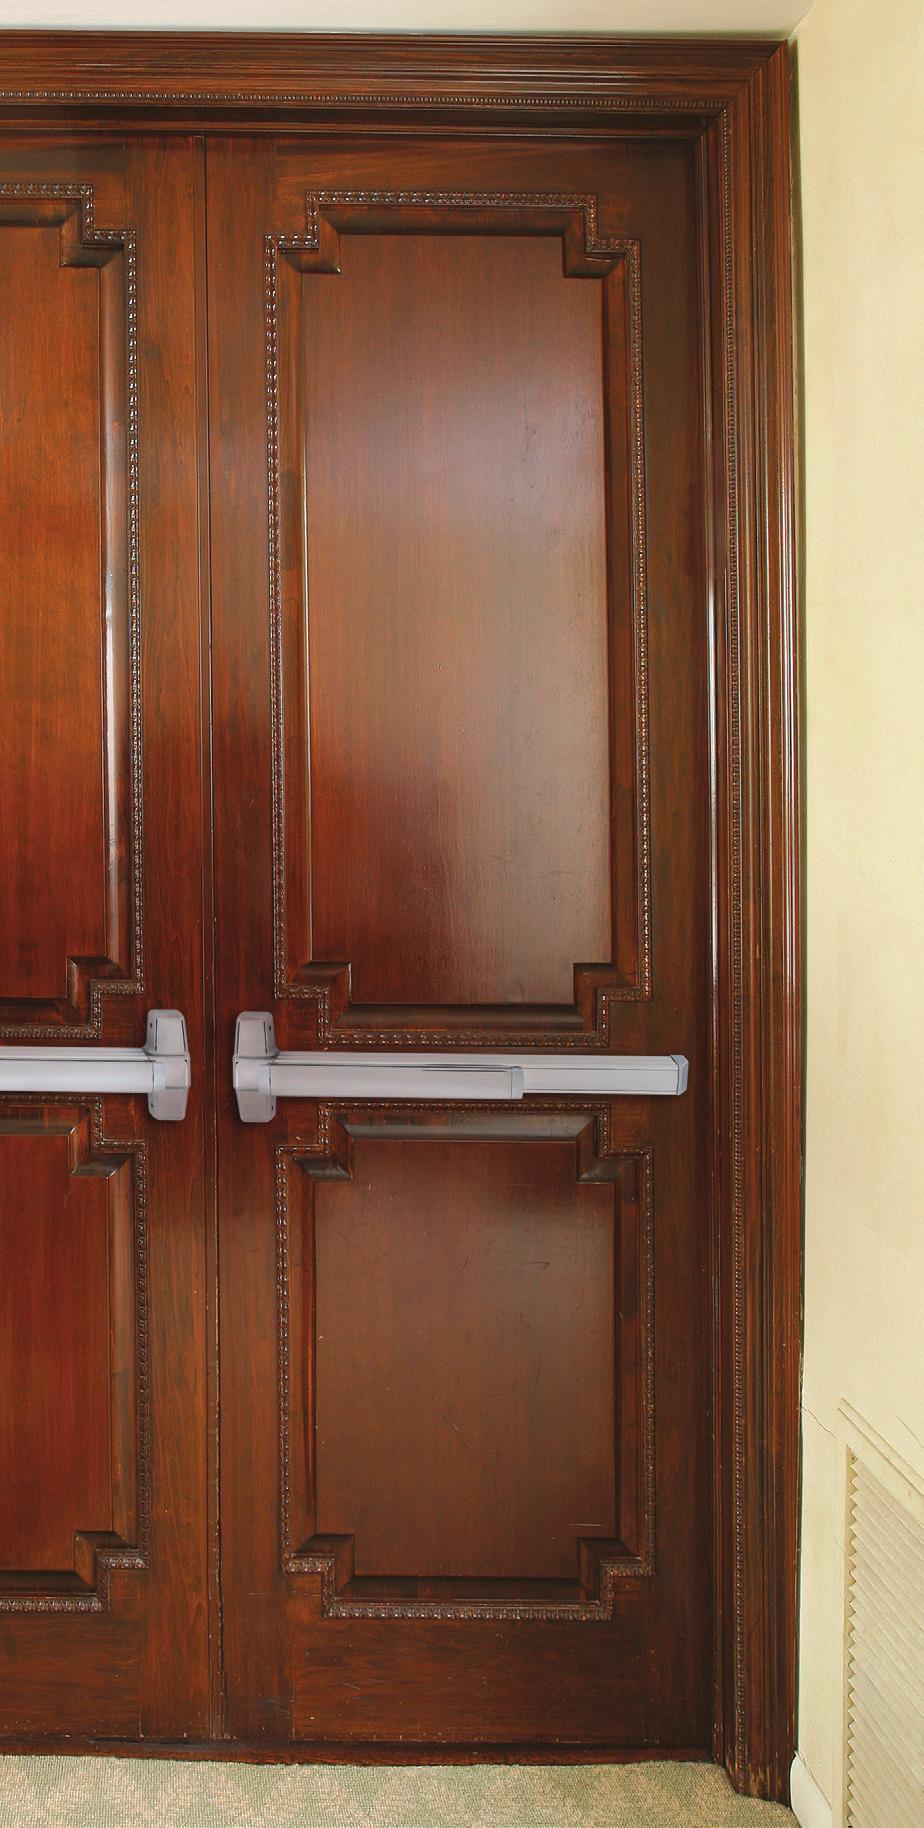 Structural integrity and style for wood doors Wood doors serve many functions from protecting a facility to providing superior aesthetics.